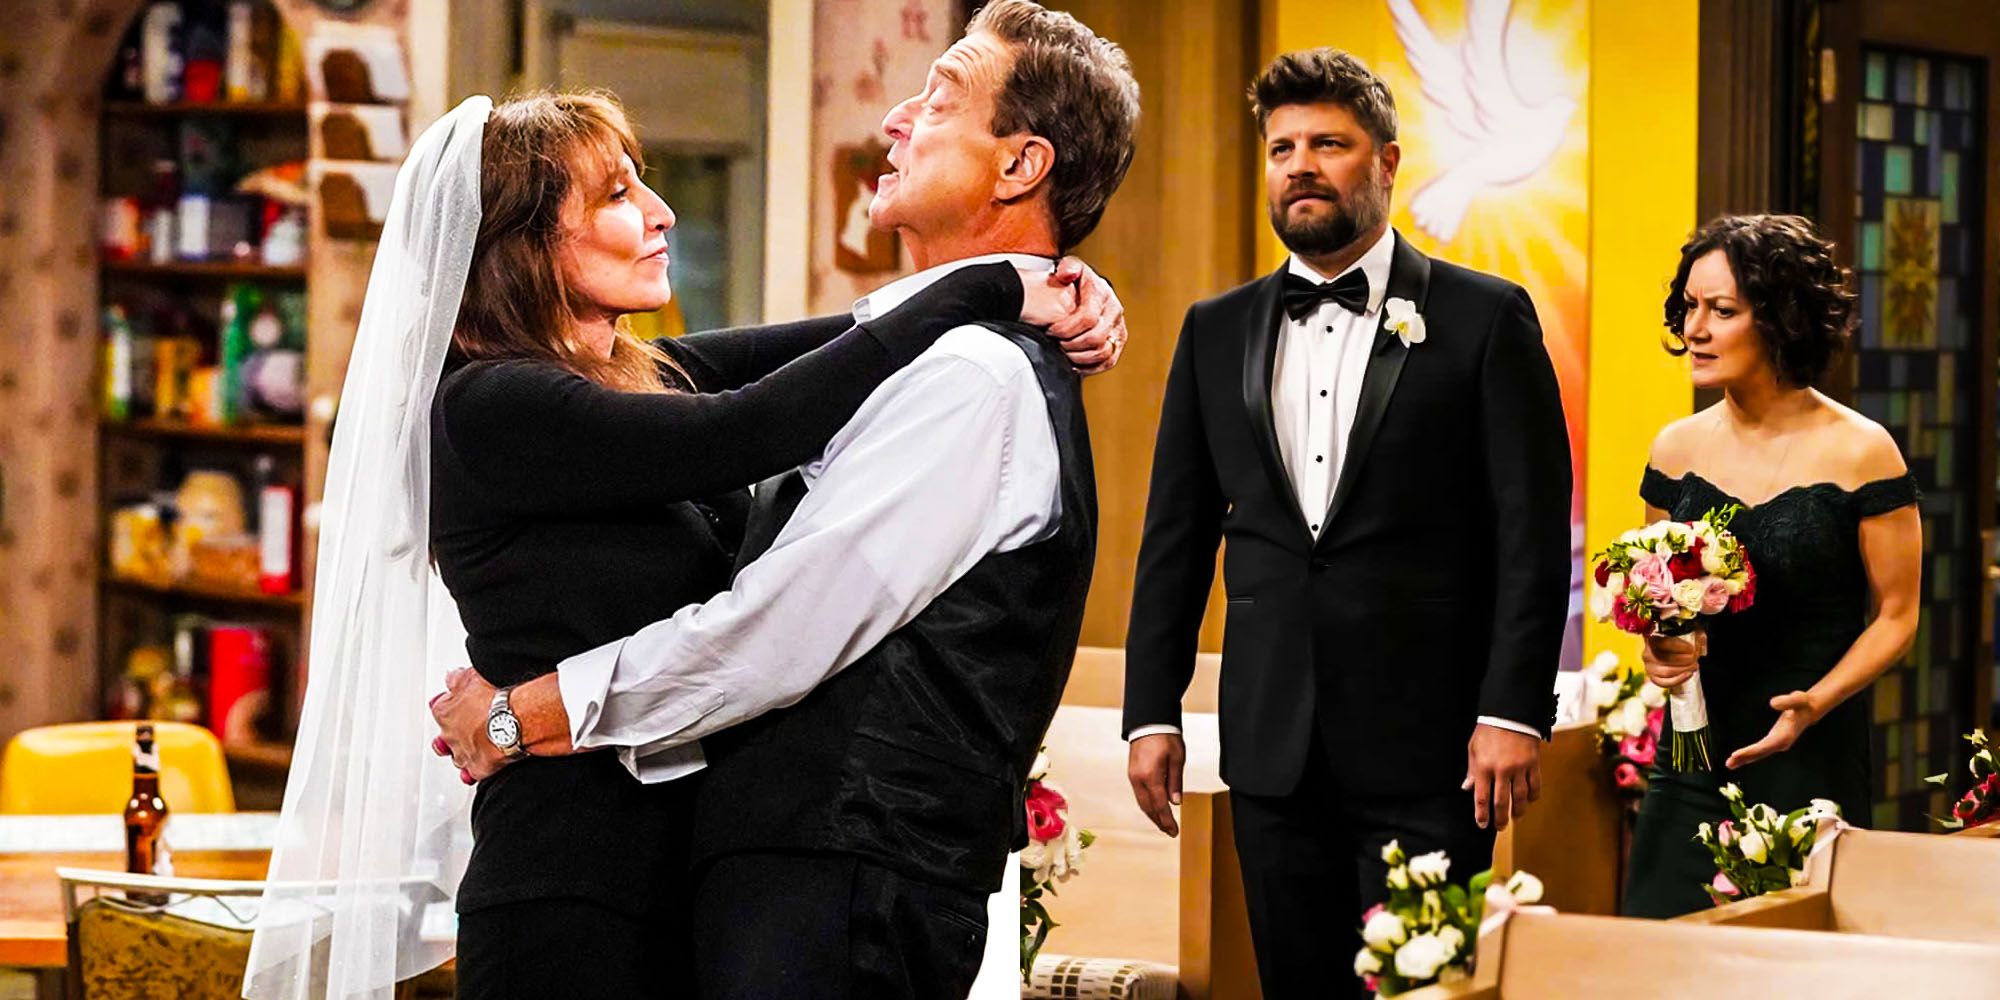 The conners why ben was invited to dans wedding darlene